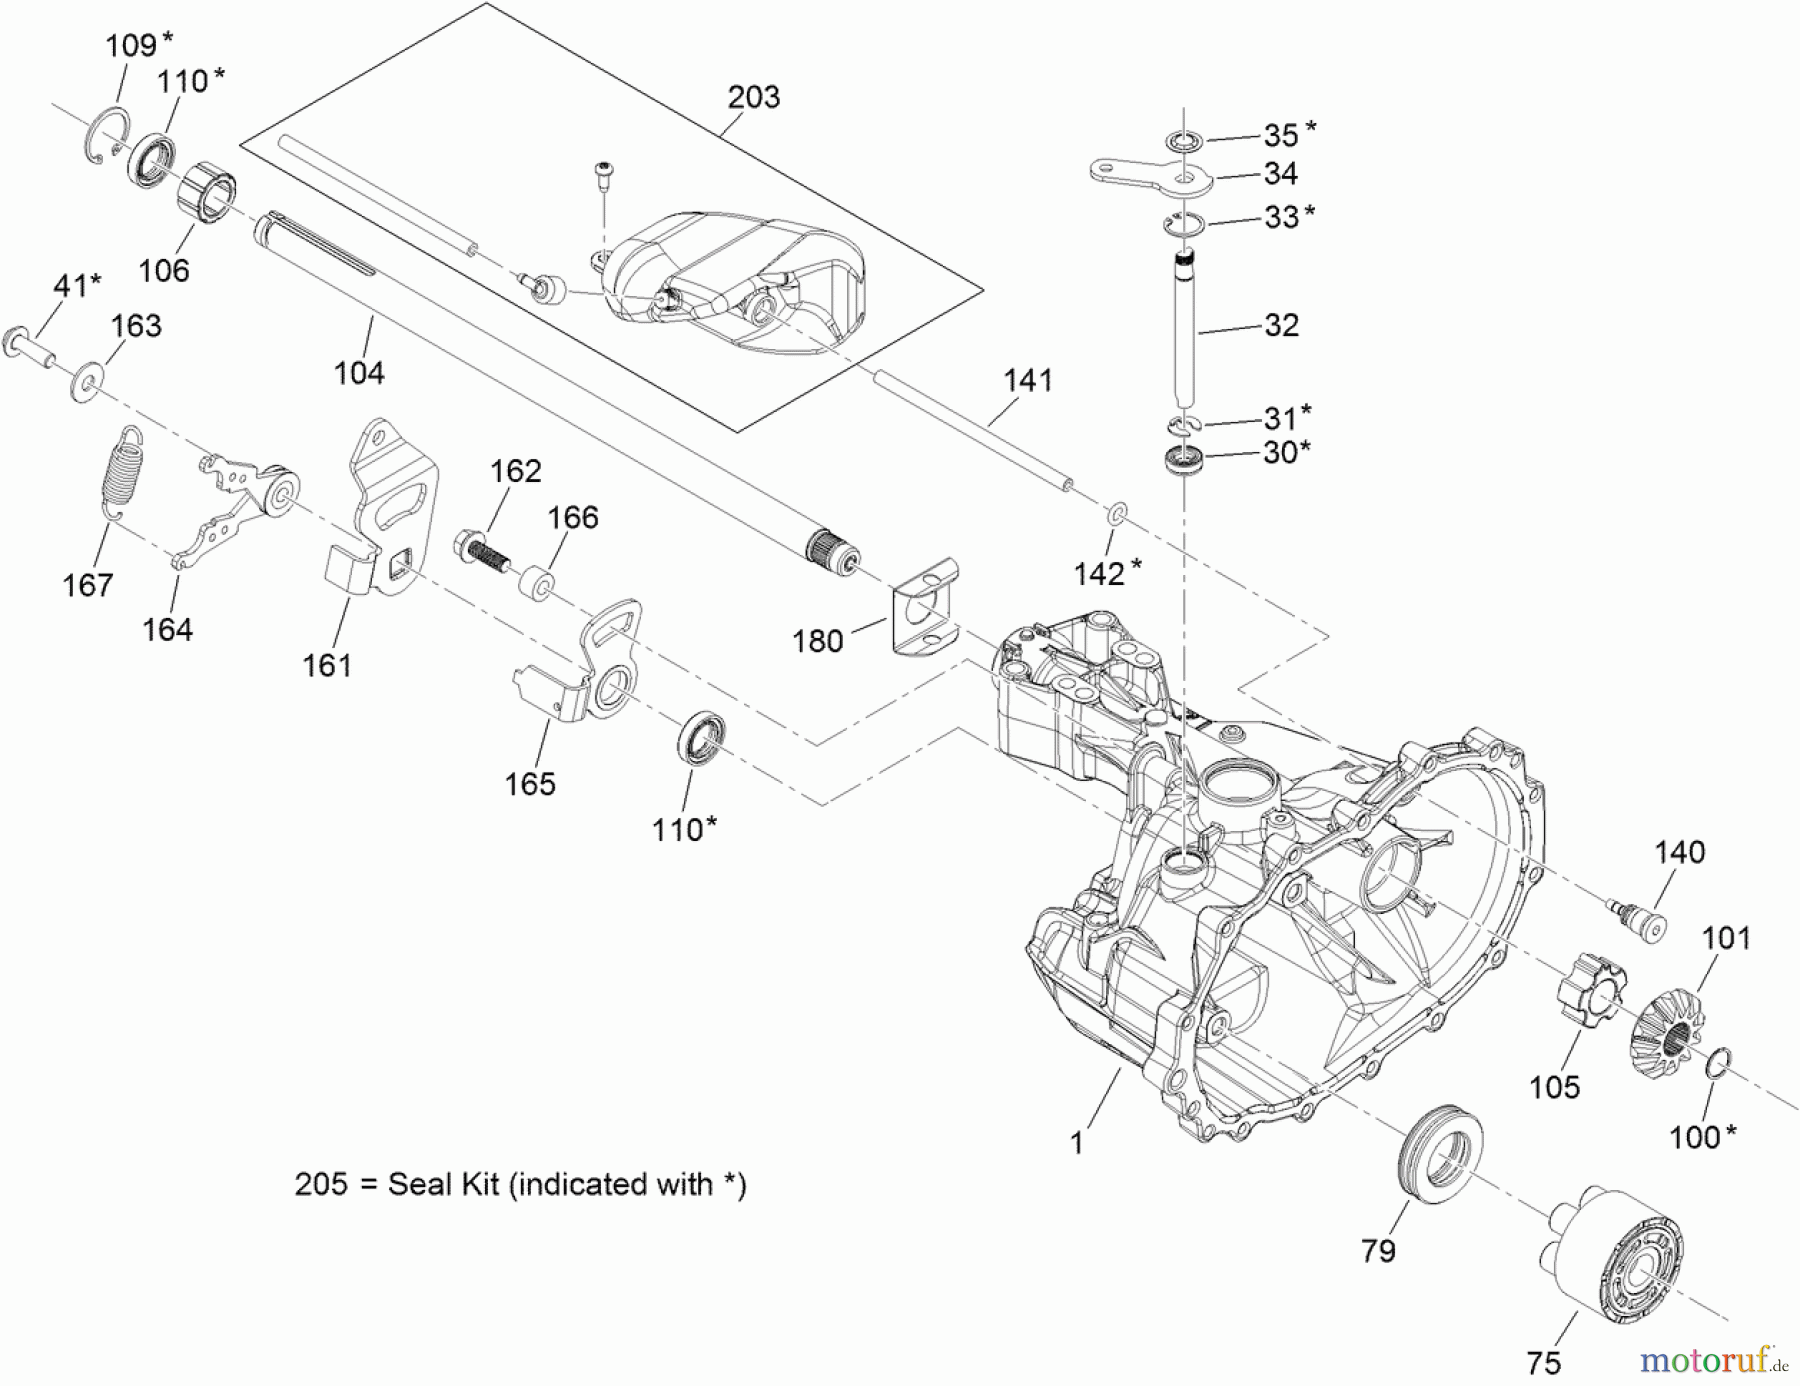  Toro Neu Mowers, Lawn & Garden Tractor Seite 1 74560 (DH 140) - Toro DH 140 Lawn Tractor, 2011 (311000001-311999999) MAIN HOUSING TRANSMISSION ASSEMBLY NO. 121-0999